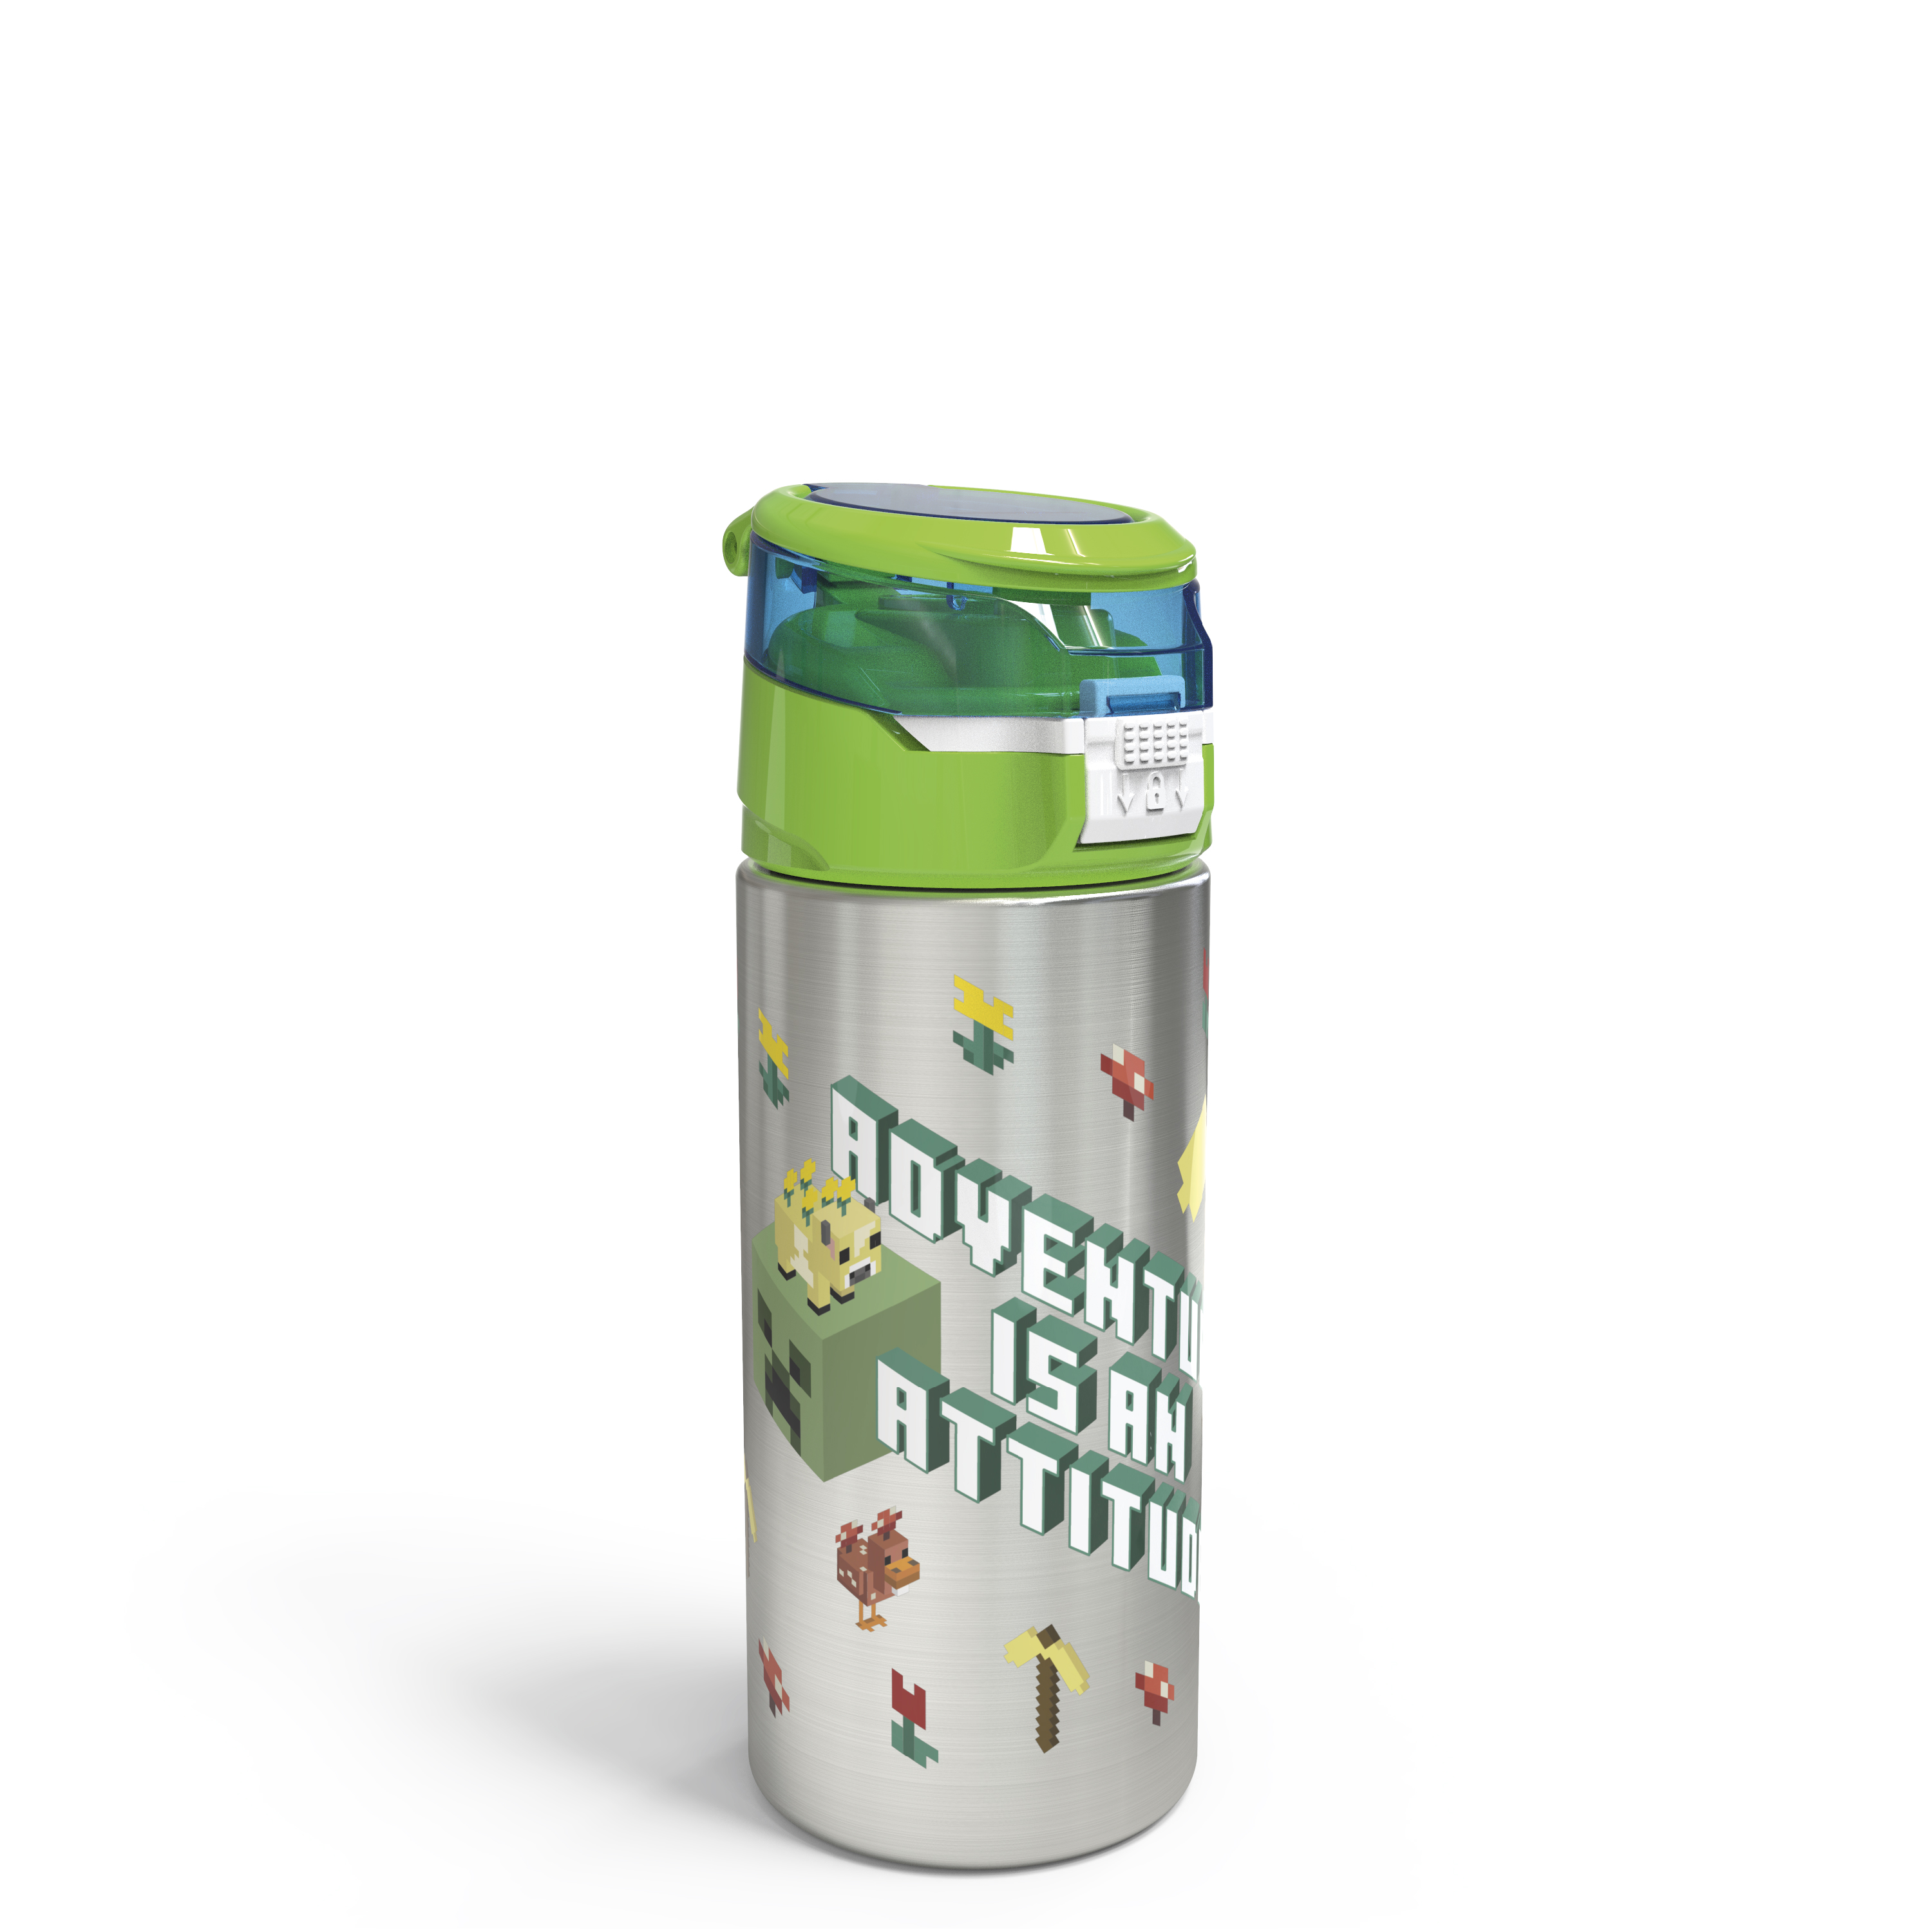 Minecraft 19.5 ounce Stainless Steel Water Bottle with Straw, Creeper and More slideshow image 8